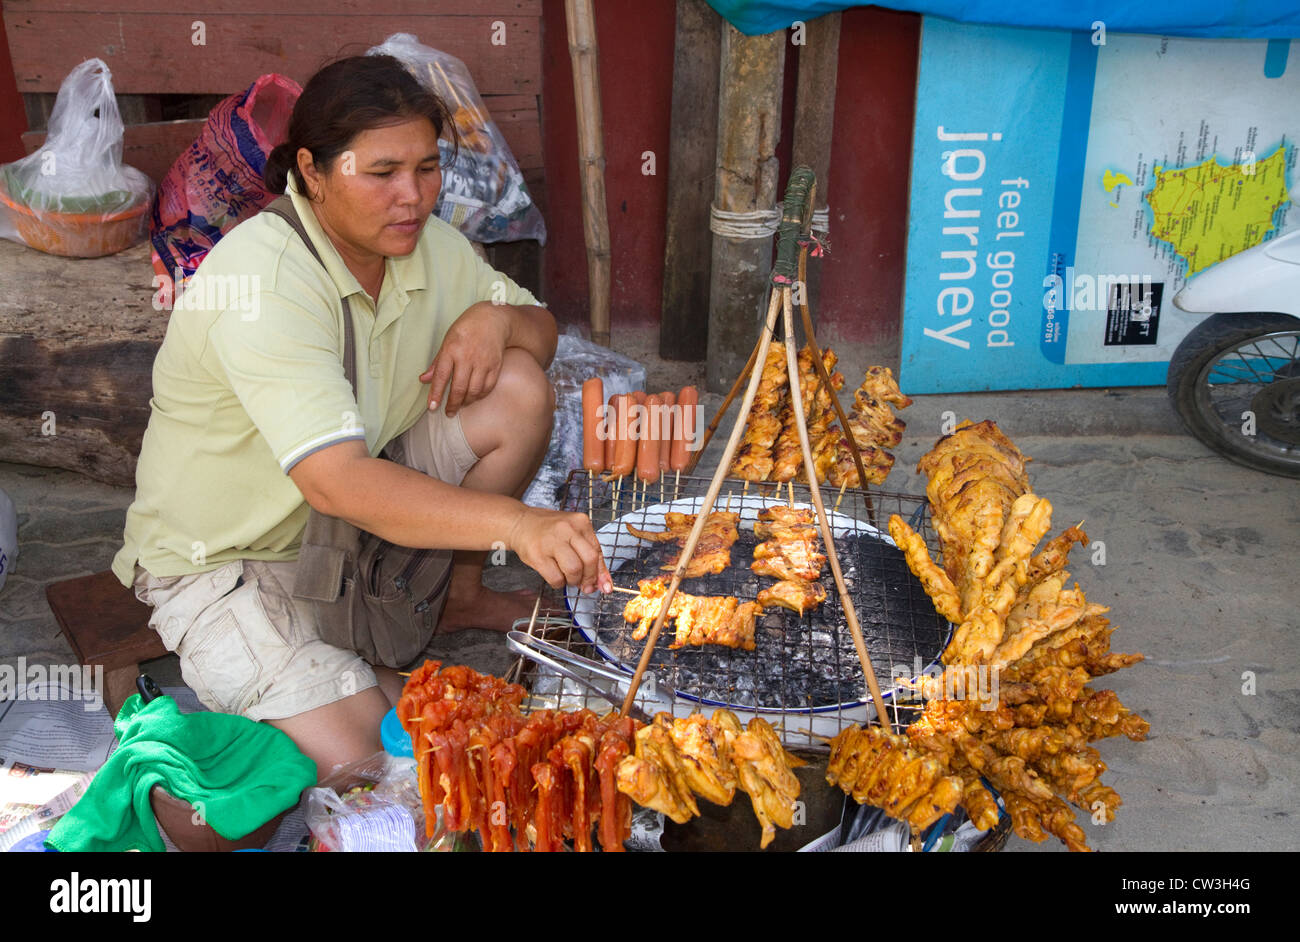 Food vendor grilling meat over a charcoal fire at Chaweng beach on the island of Ko Samui, Thailand. Stock Photo